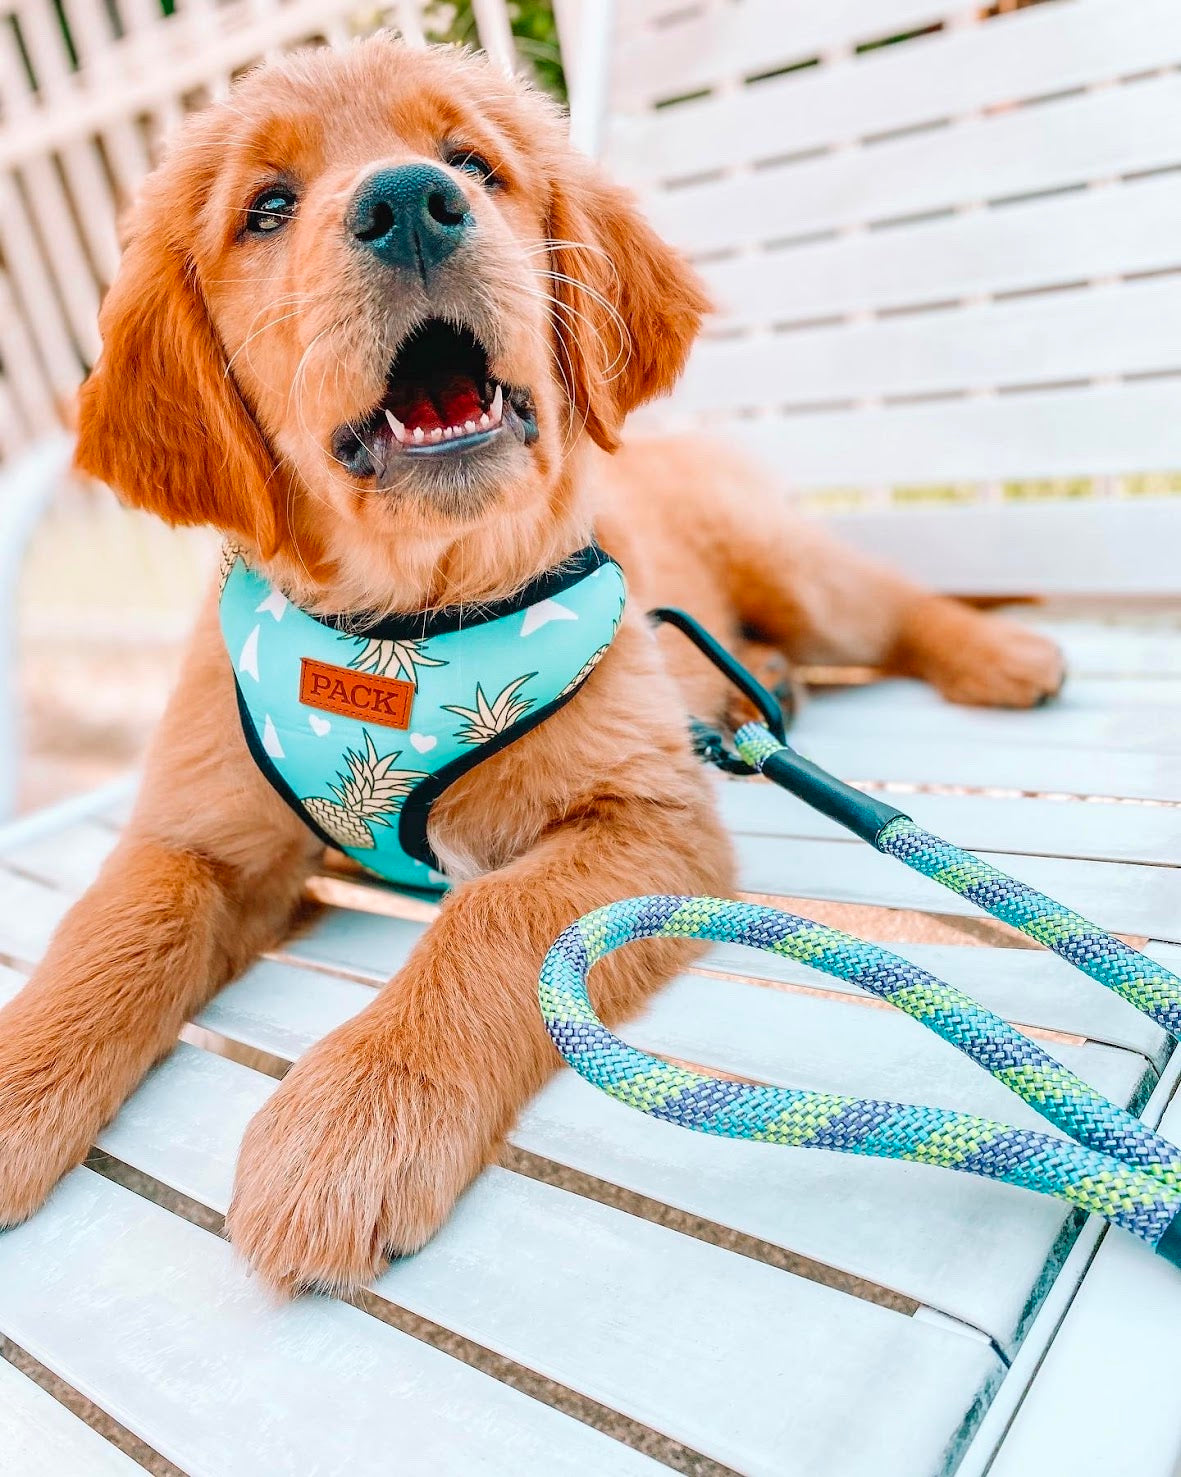 Dog Collars in Dog Collars, Leashes, and Harnesses 